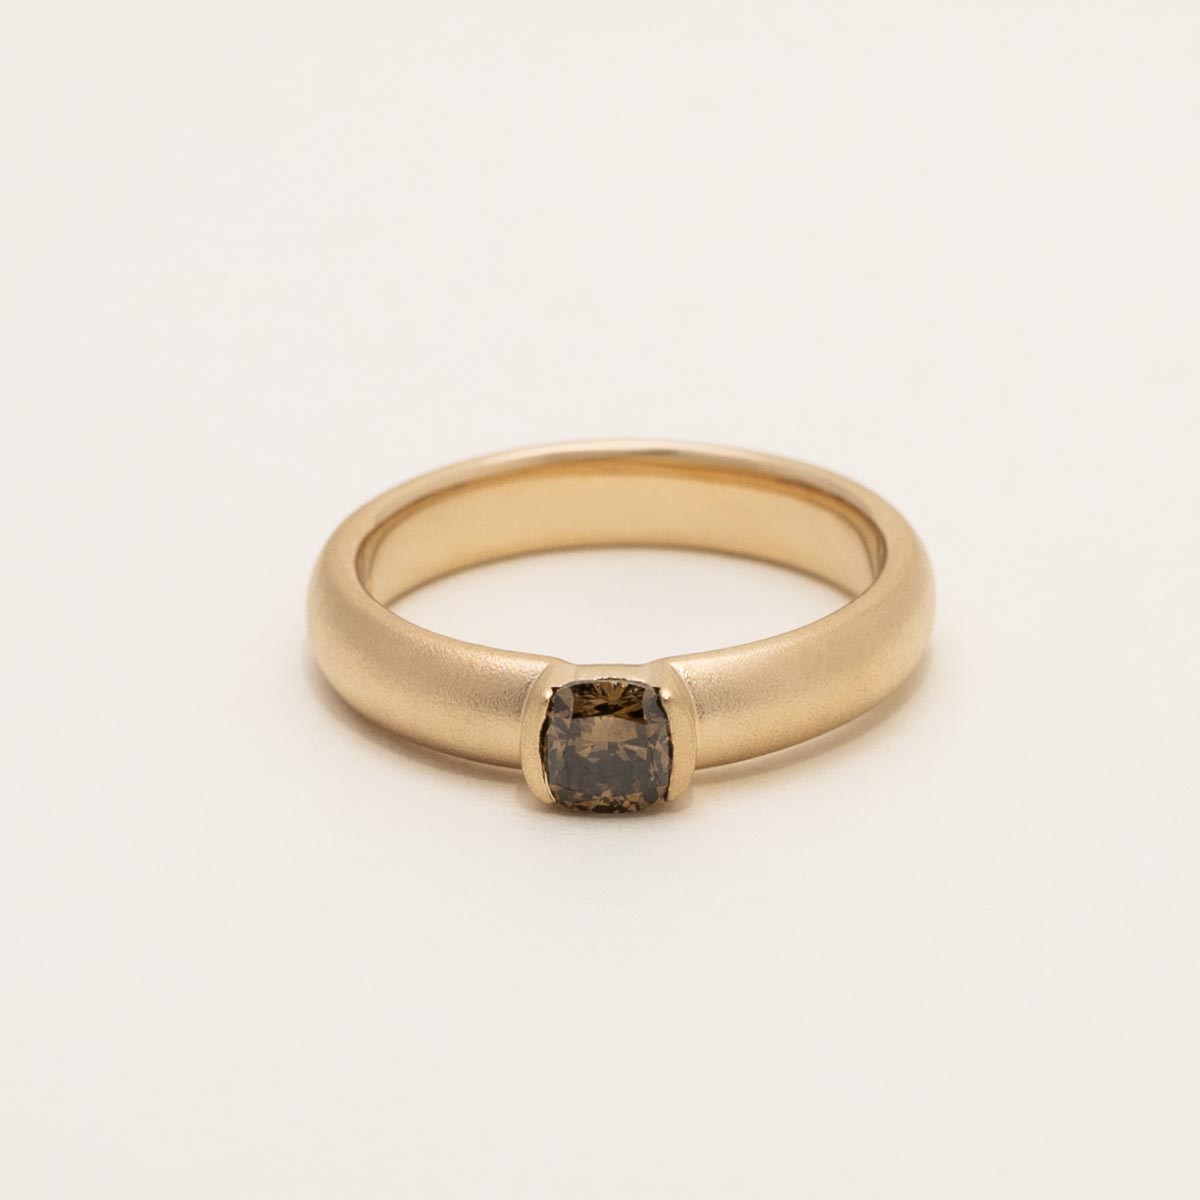 Champagne Diamond Bezel Ring in 14kt Yellow Gold (3/8ct)